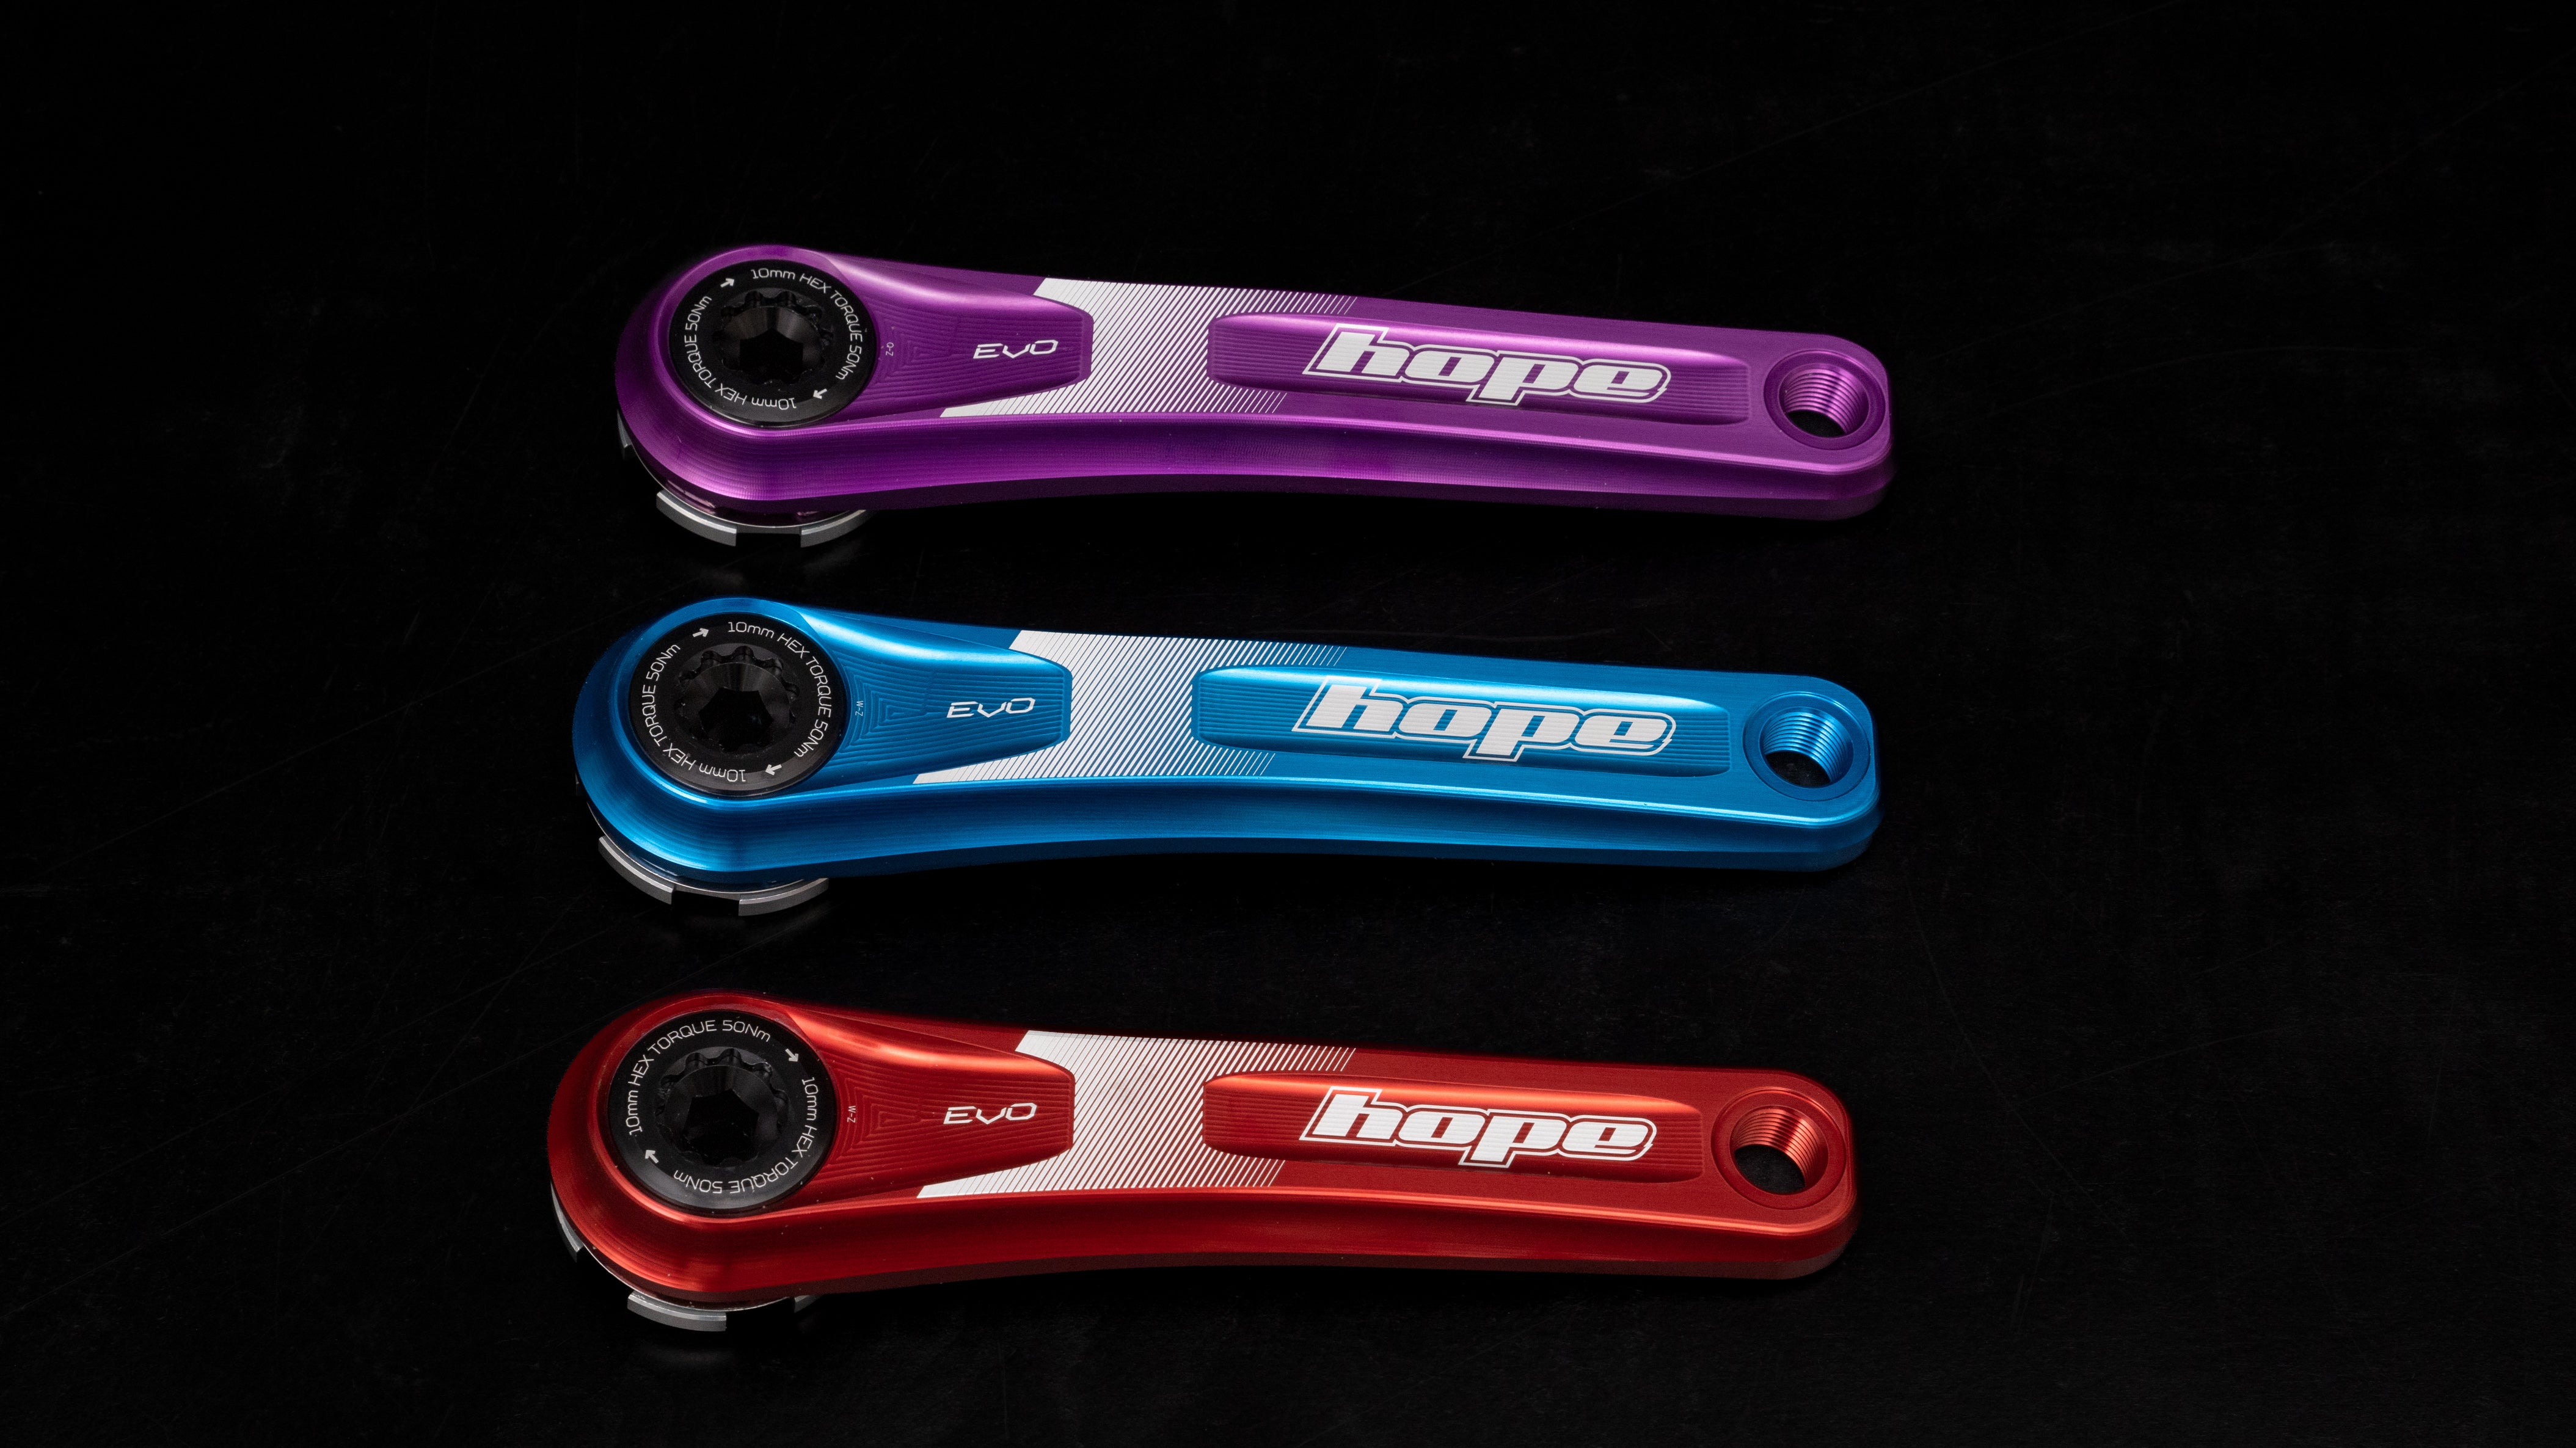 155mm cranks compared to 16 and 170mm cranks for mountain biking